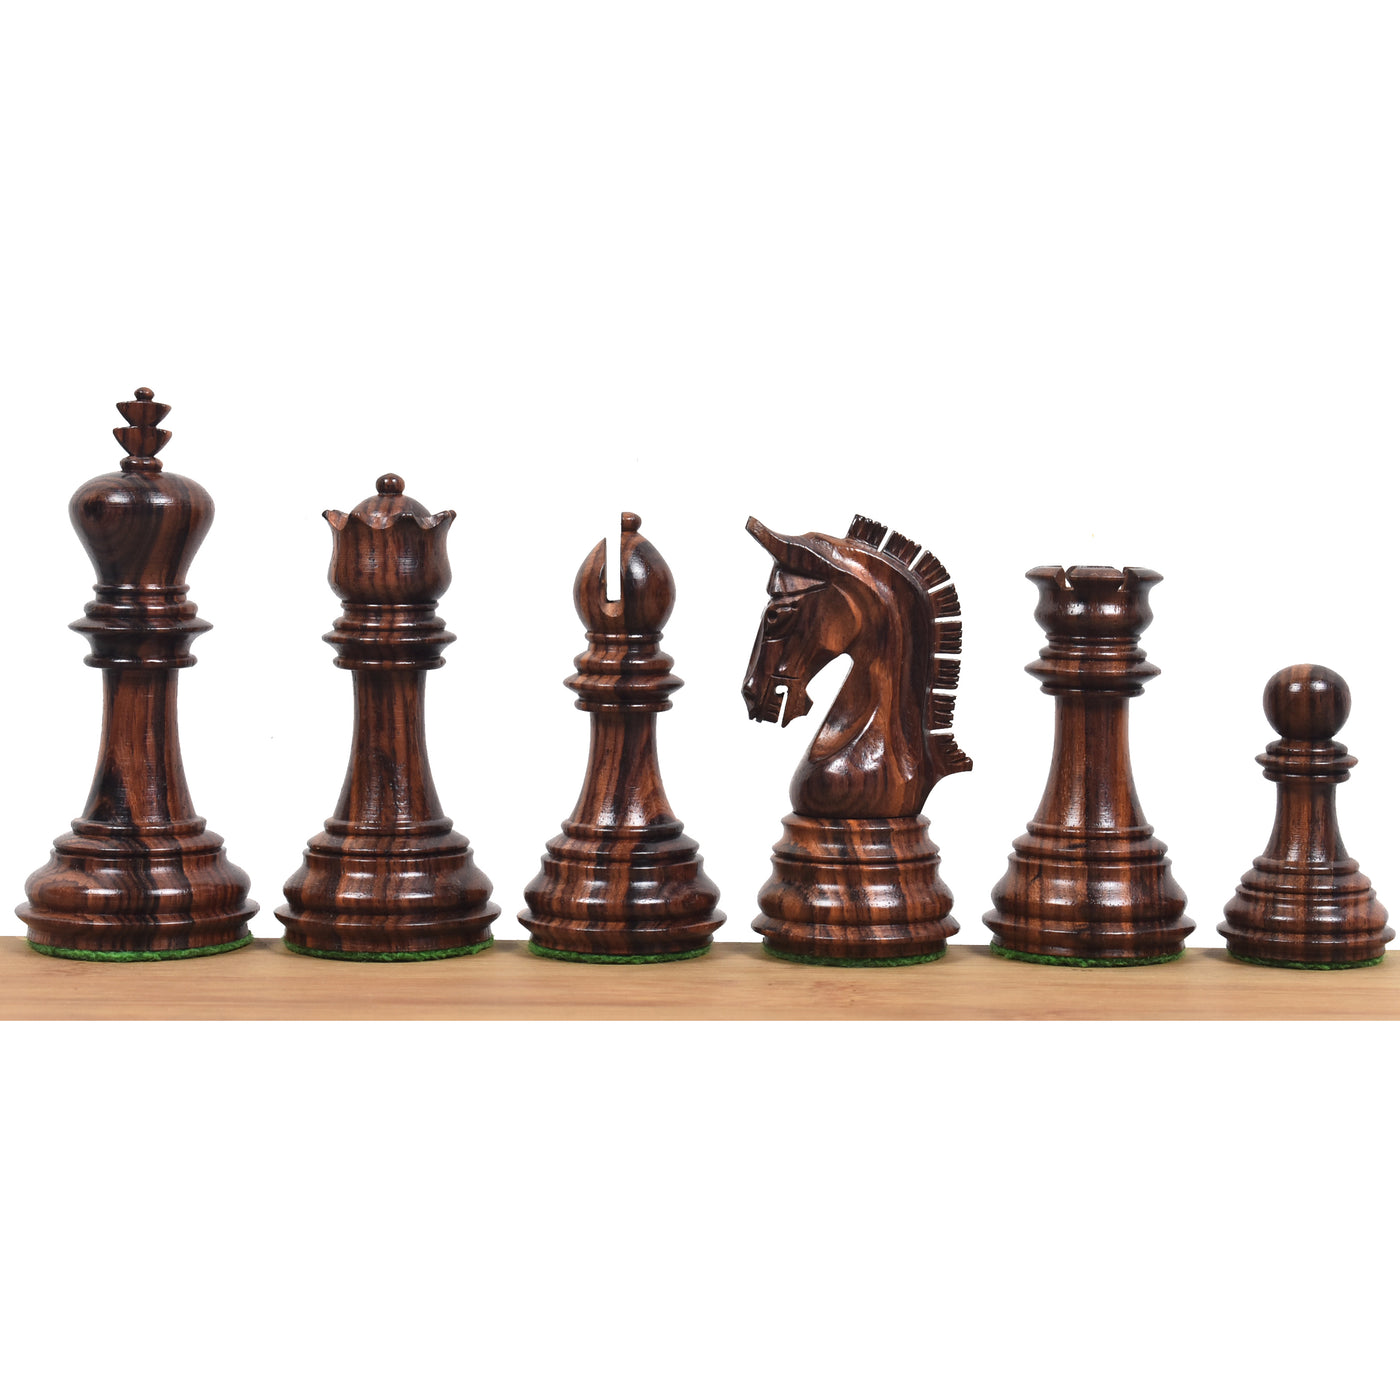 Slightly Imperfect 3.8" Imperial Staunton Luxury Chess Set- Chess Pieces Only - Weighted Rosewood